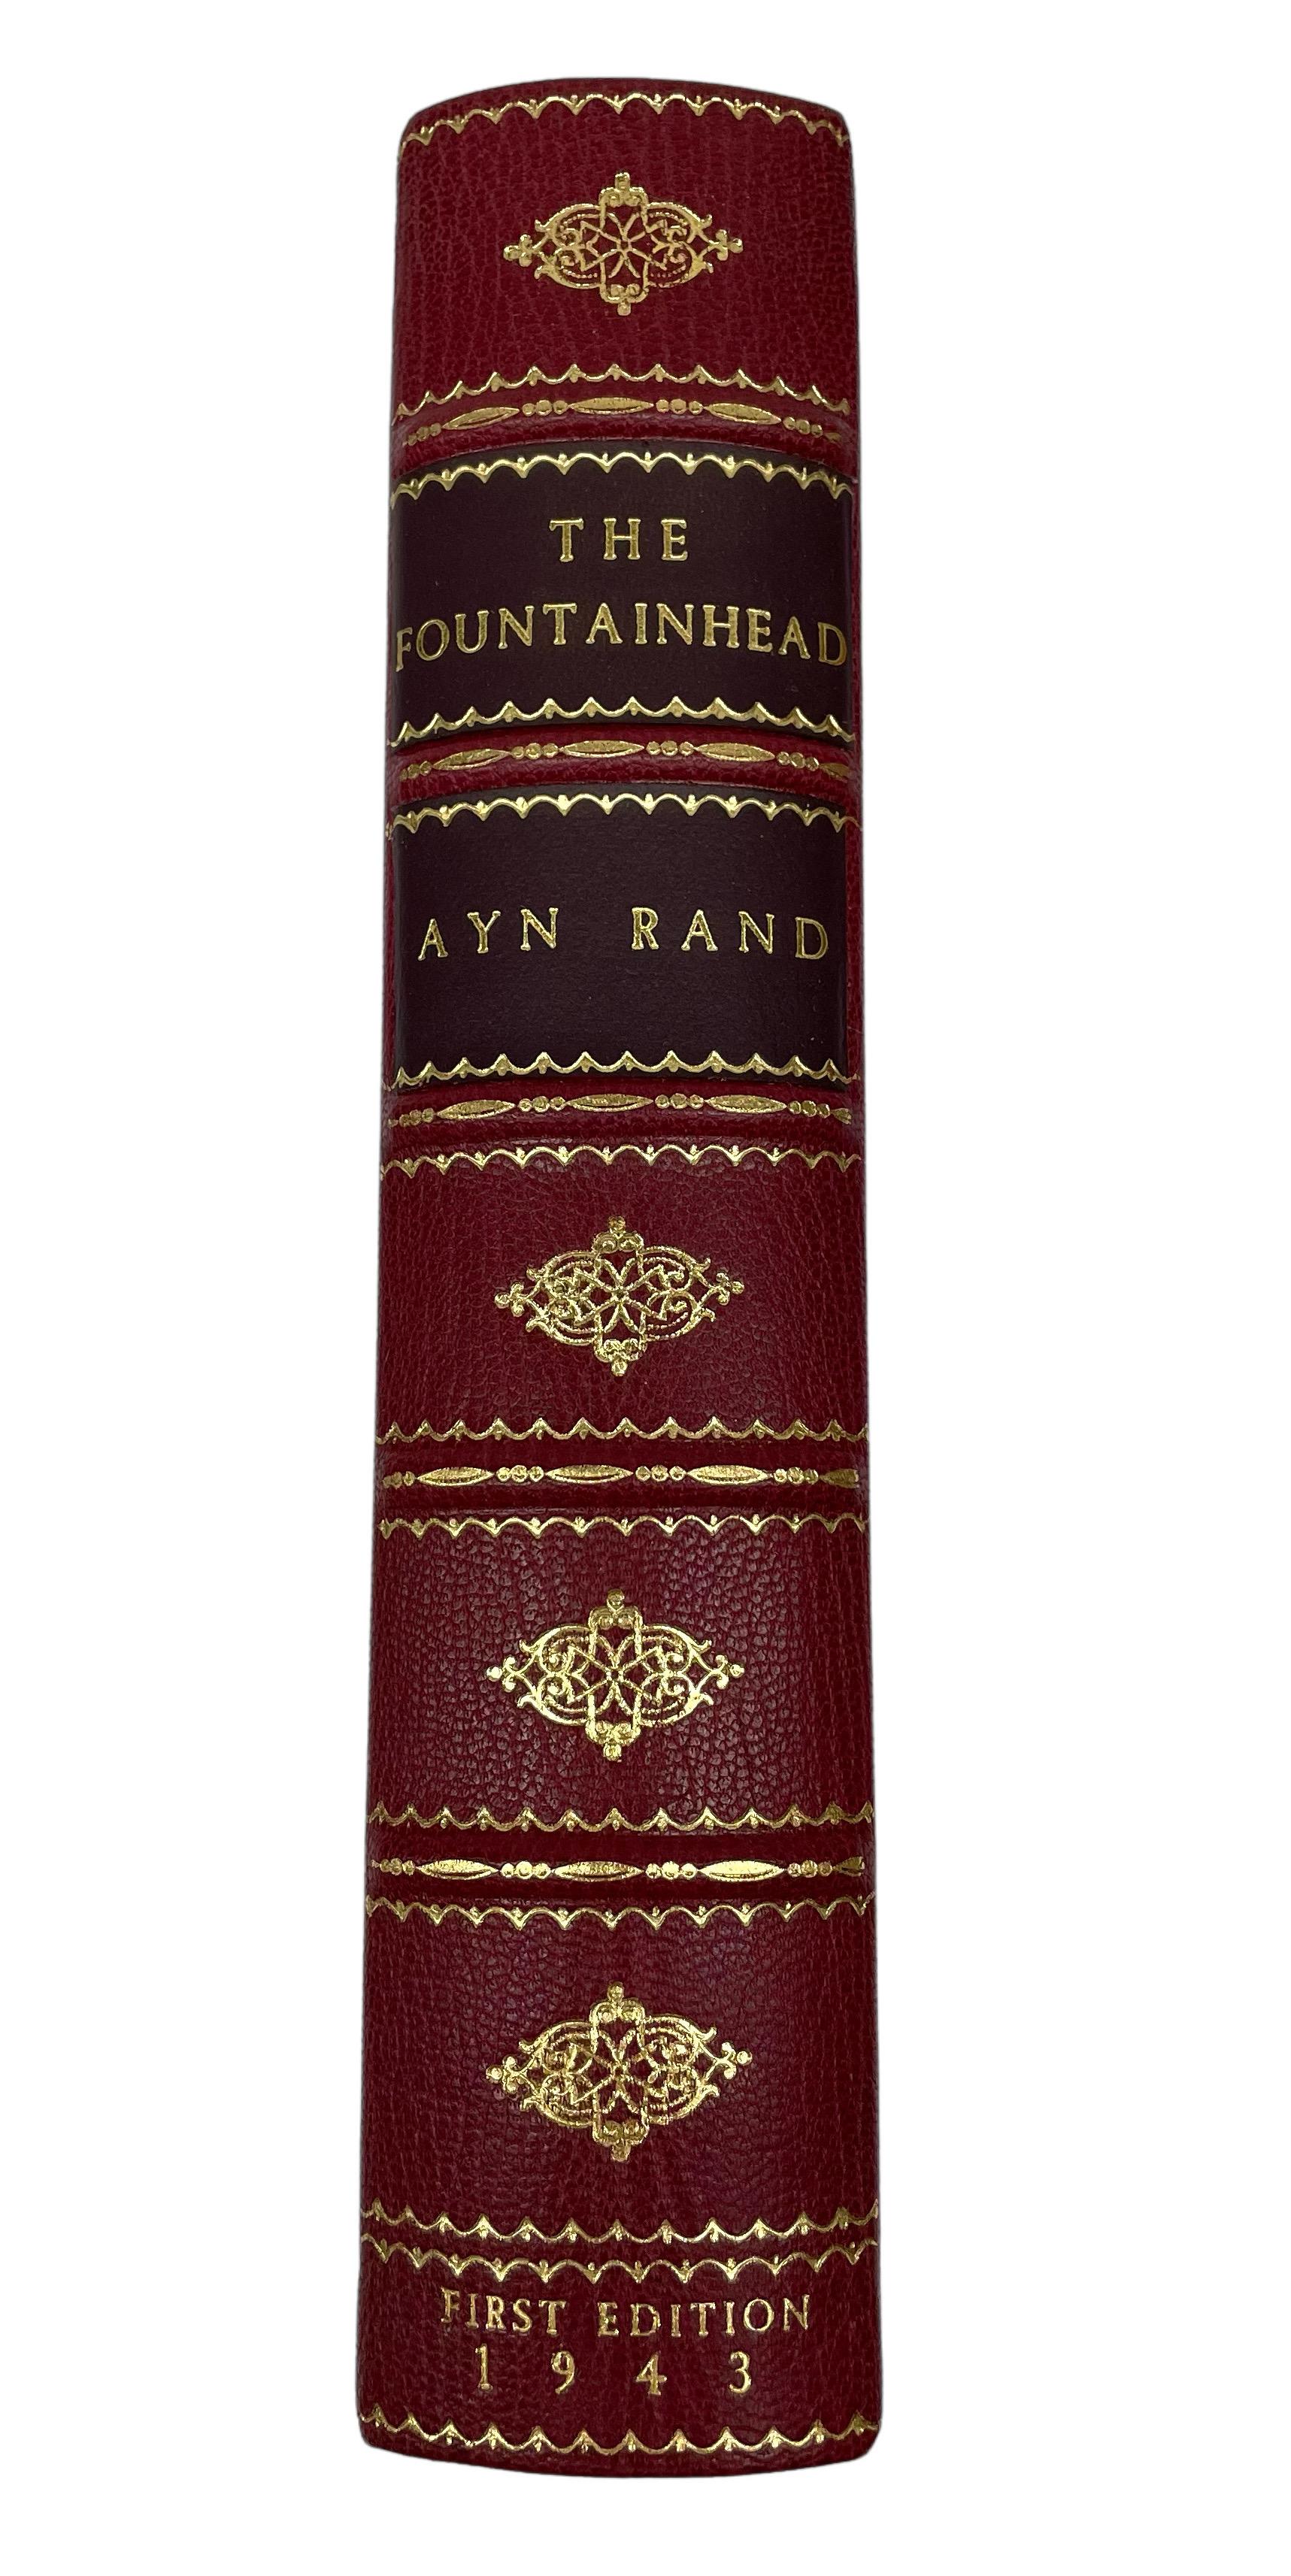 Mid-Century Modern Fountainhead by Ayn Rand, First Edition, First Printing, 1943